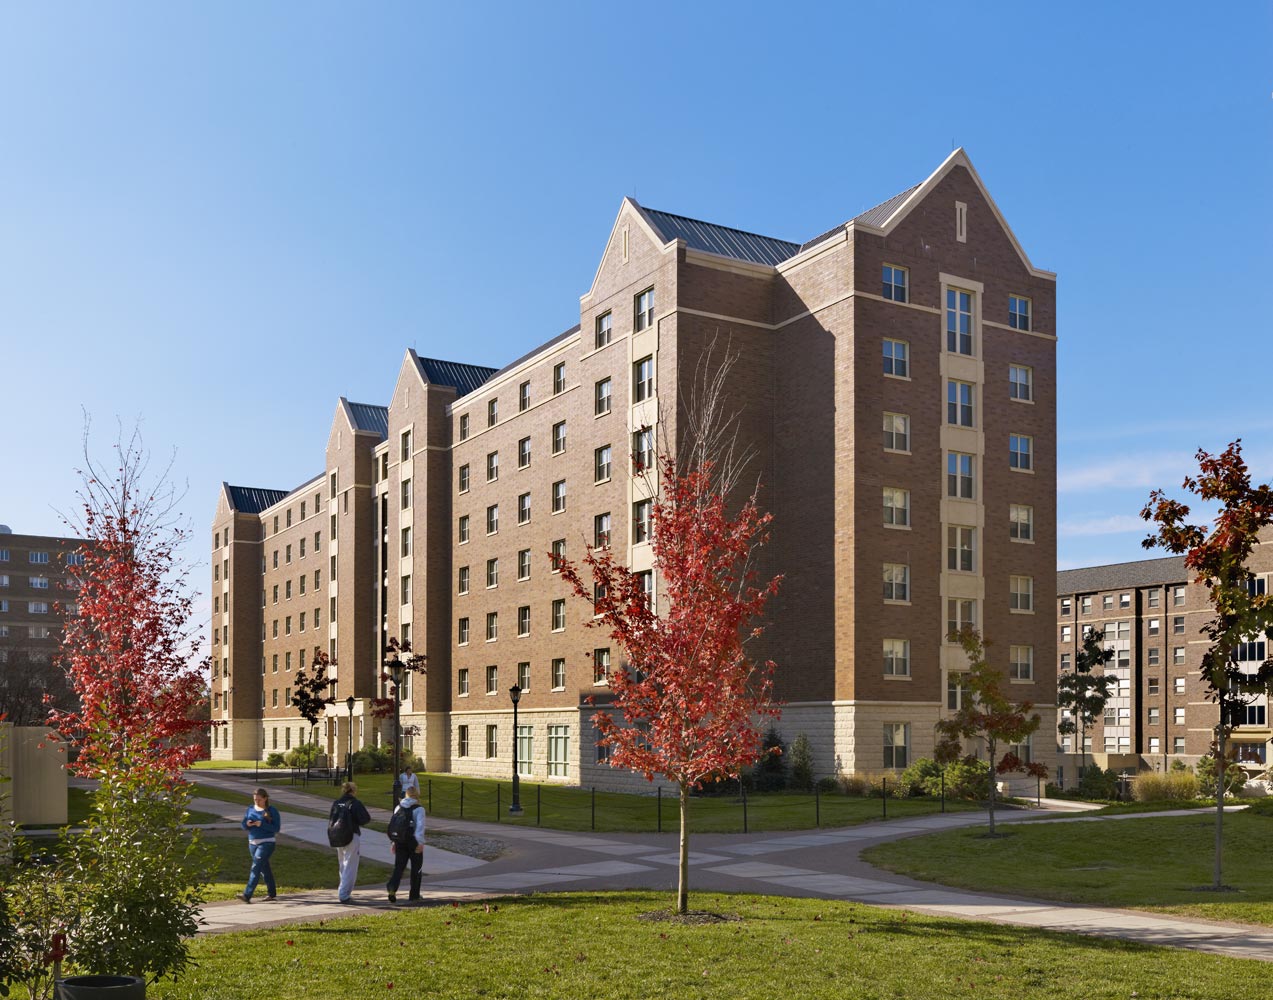 Top 10 Residences at West Chester University